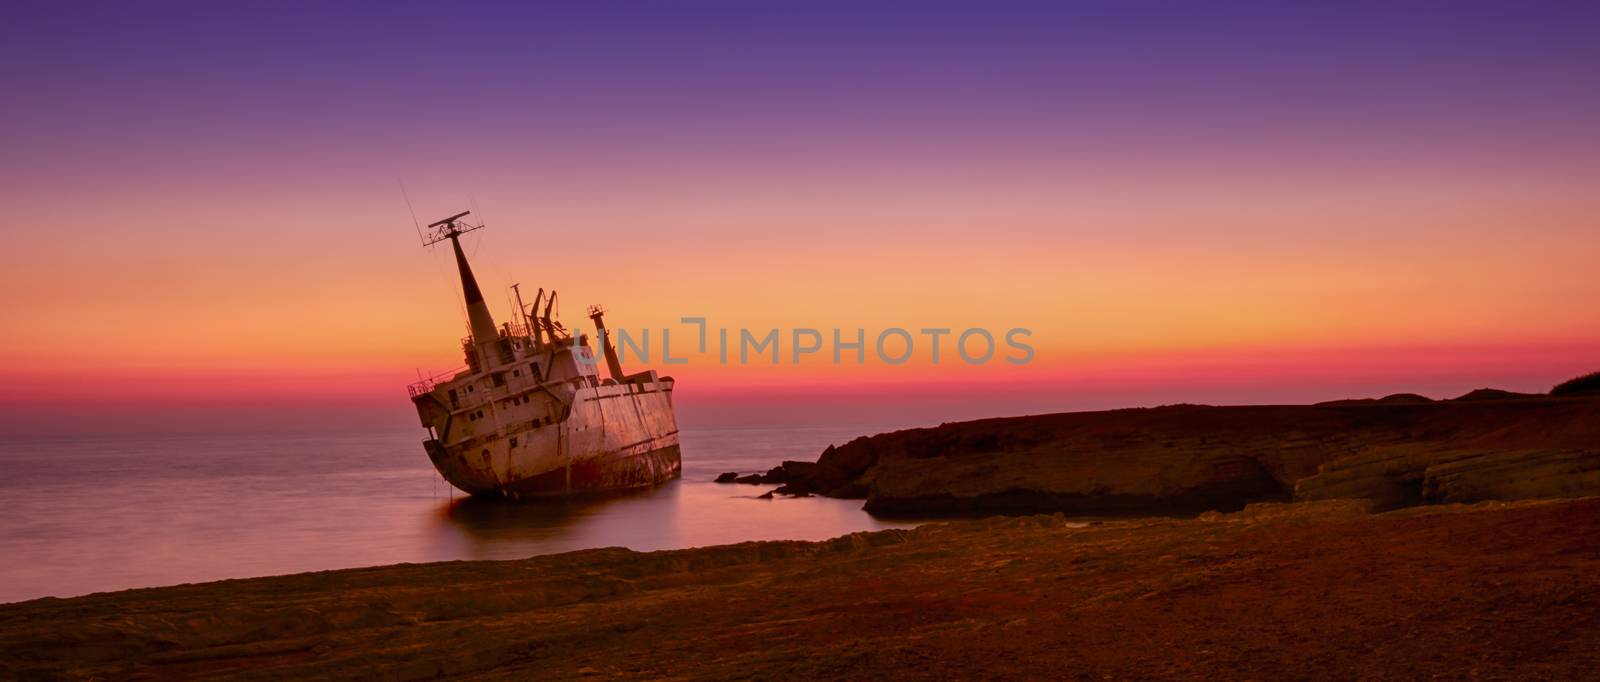 Seascape: famouse boat, shipwrecked near the rocky shore at the sunset. Mediterranean, near Paphos. Cyprus.